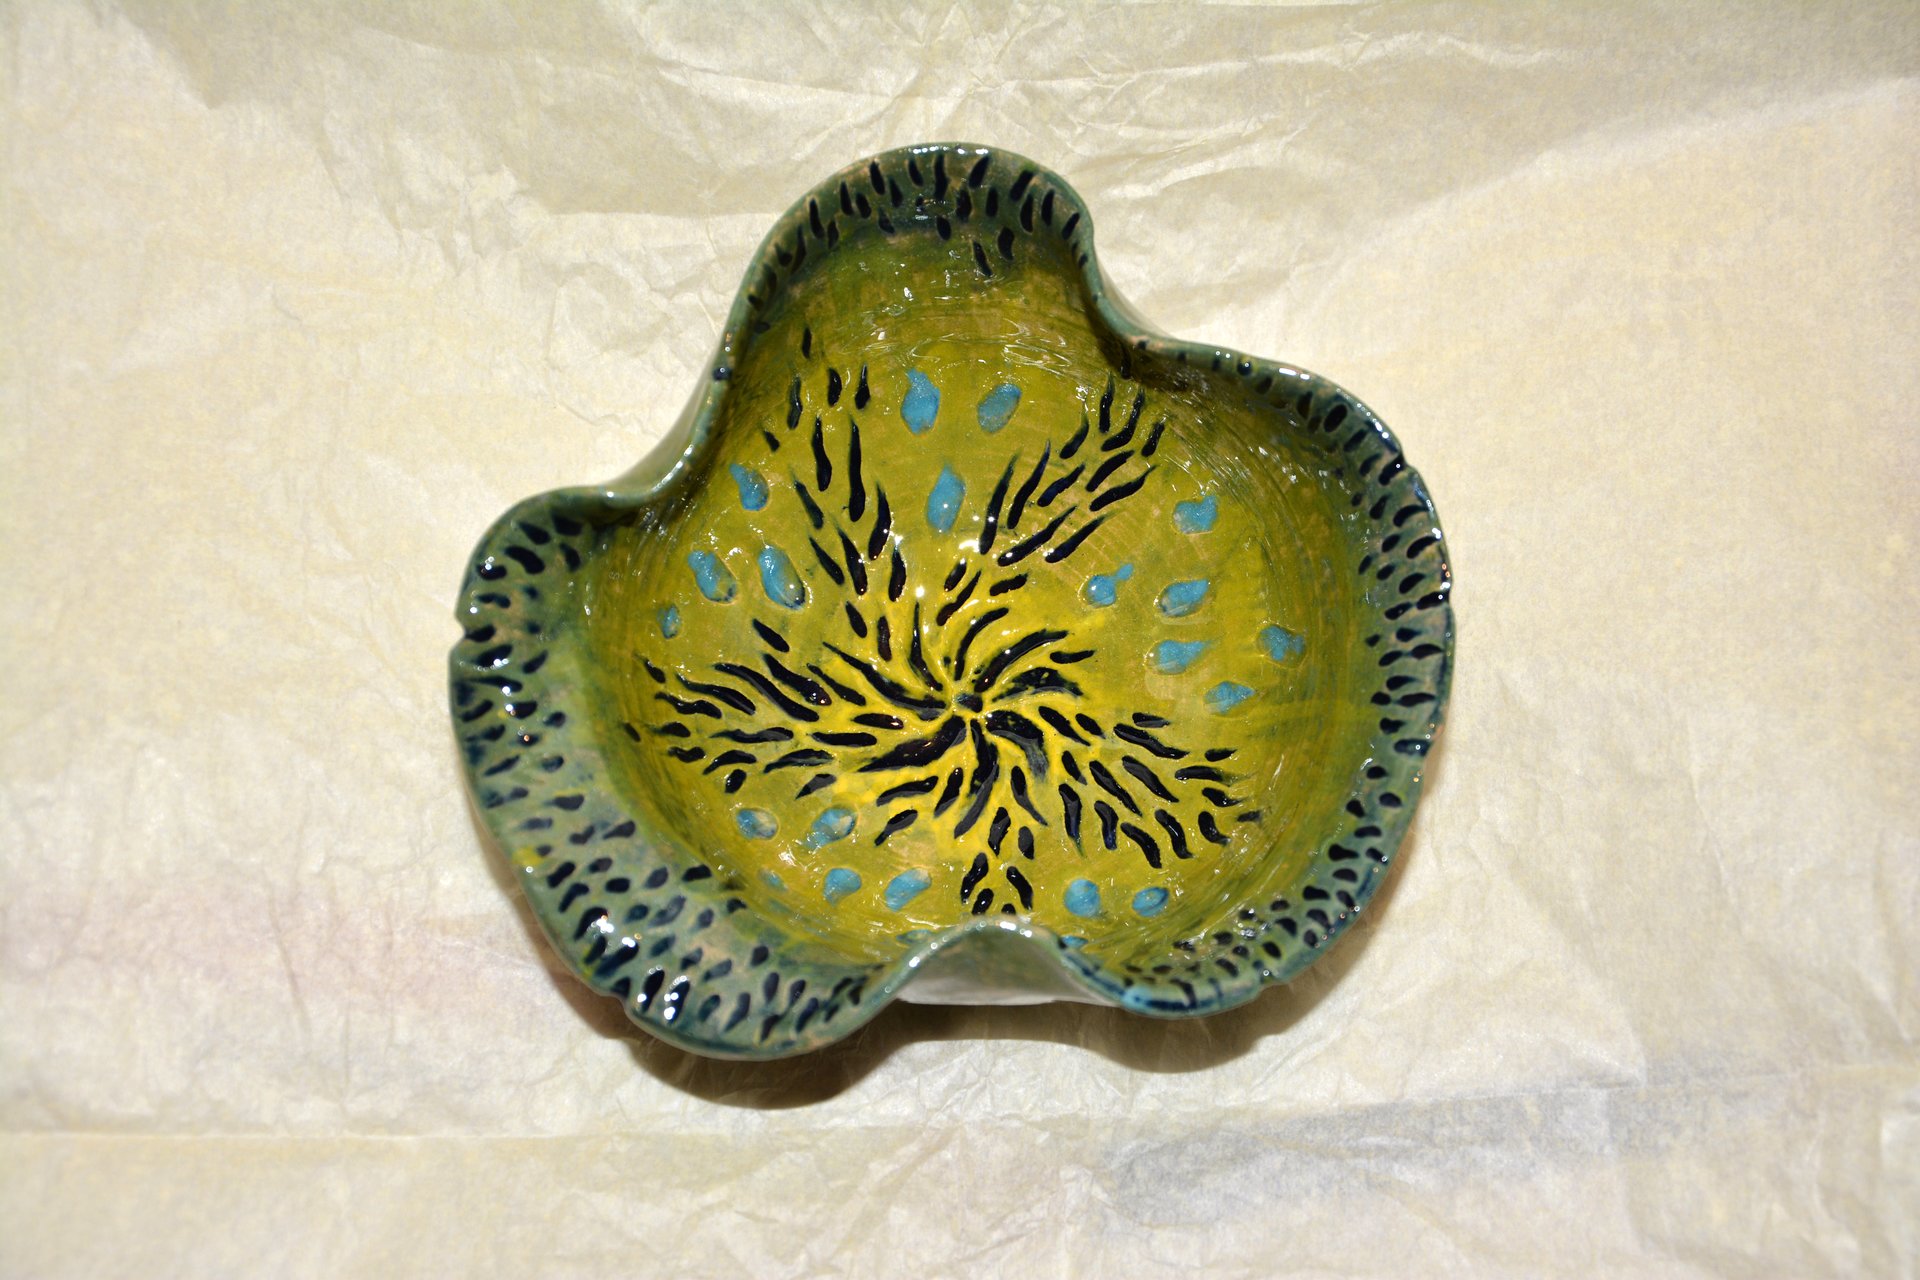 Green marine piala with a pattern of sea star - Pialy and sauceboats, height - 11 cm, width - 15 cm (extreme points), diameter of the bottom - 8 cm, photo 2 of 3.